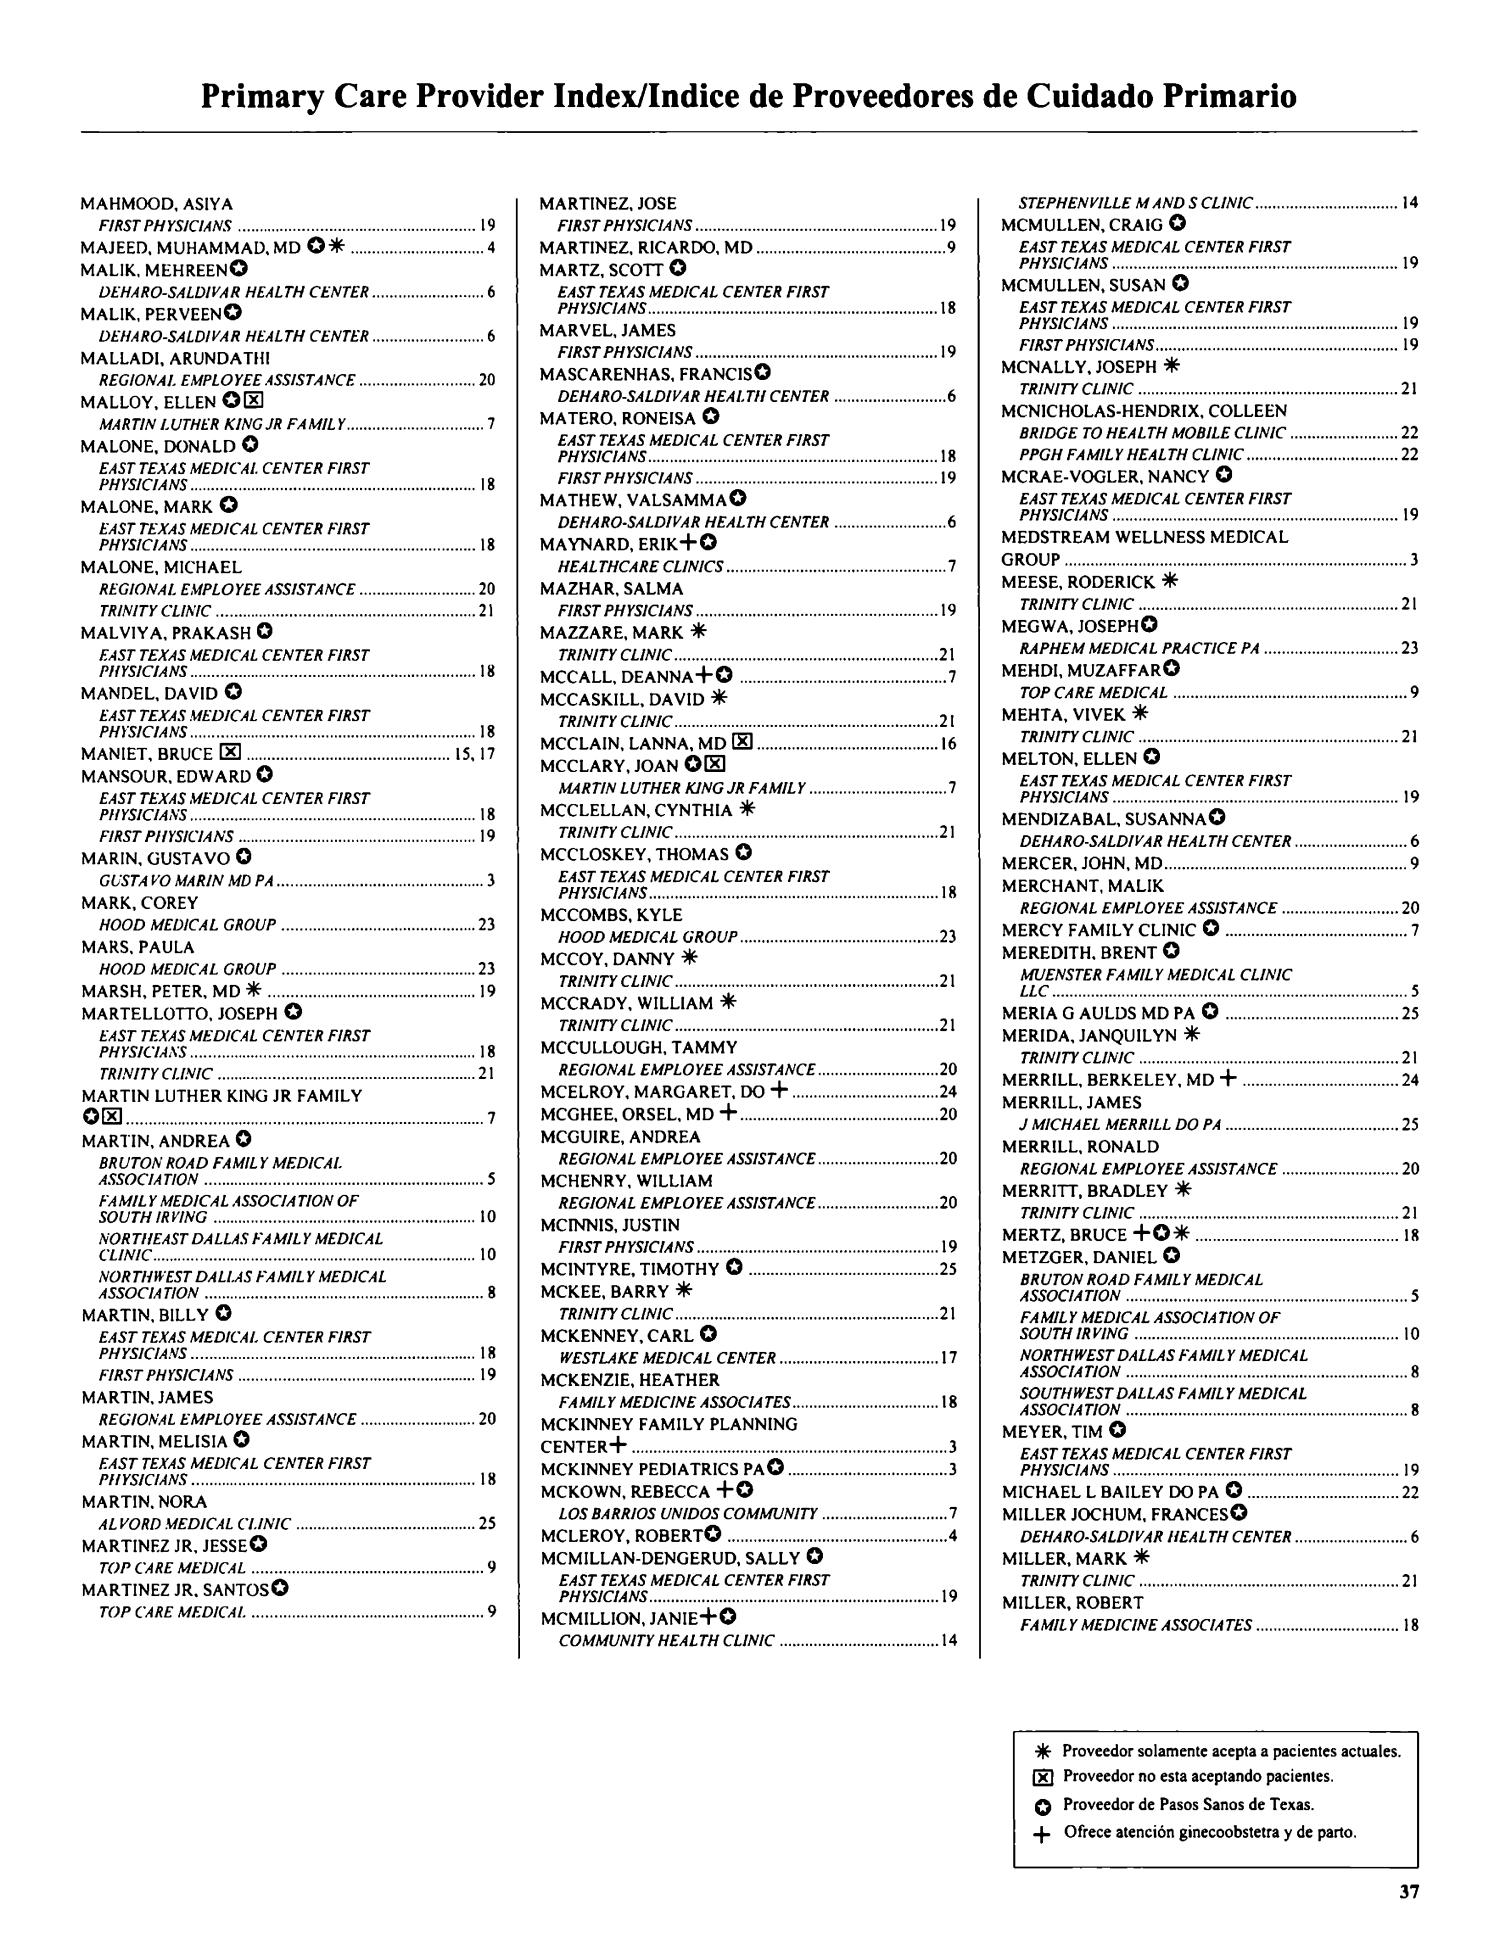 Primary Care Case Management Primary Care Provider and Hospital List: Metroplex, December 2011
                                                
                                                    37
                                                